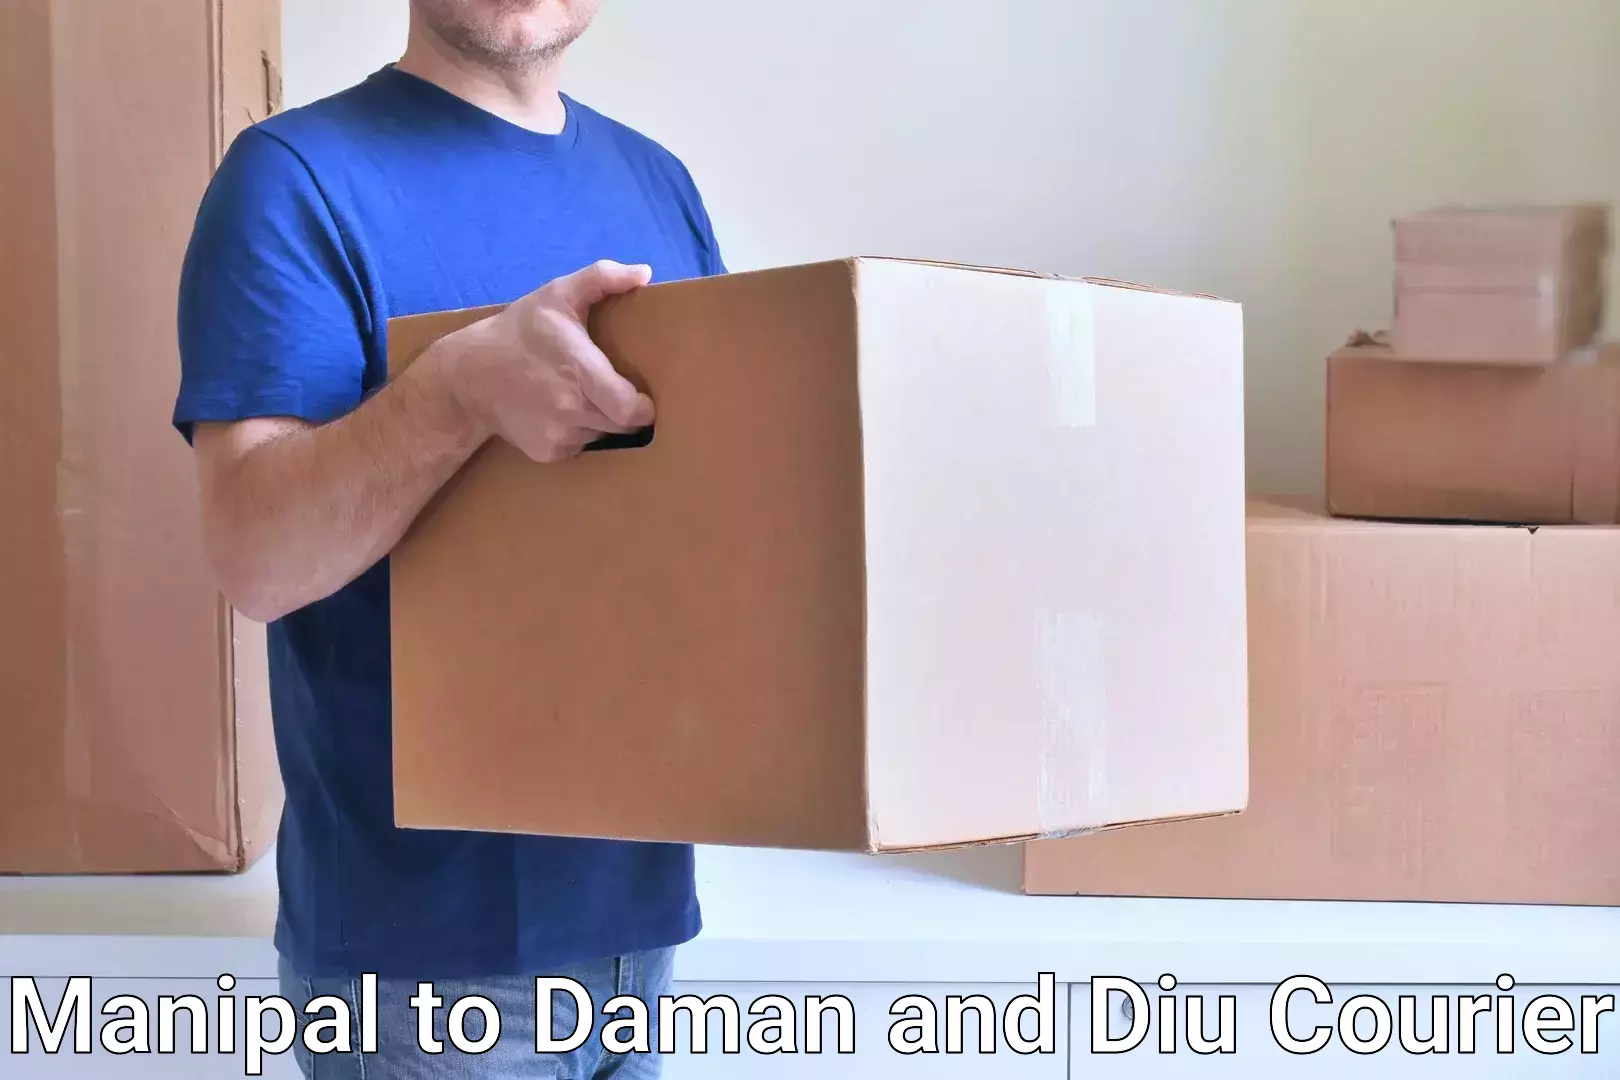 Next-generation courier services Manipal to Daman and Diu